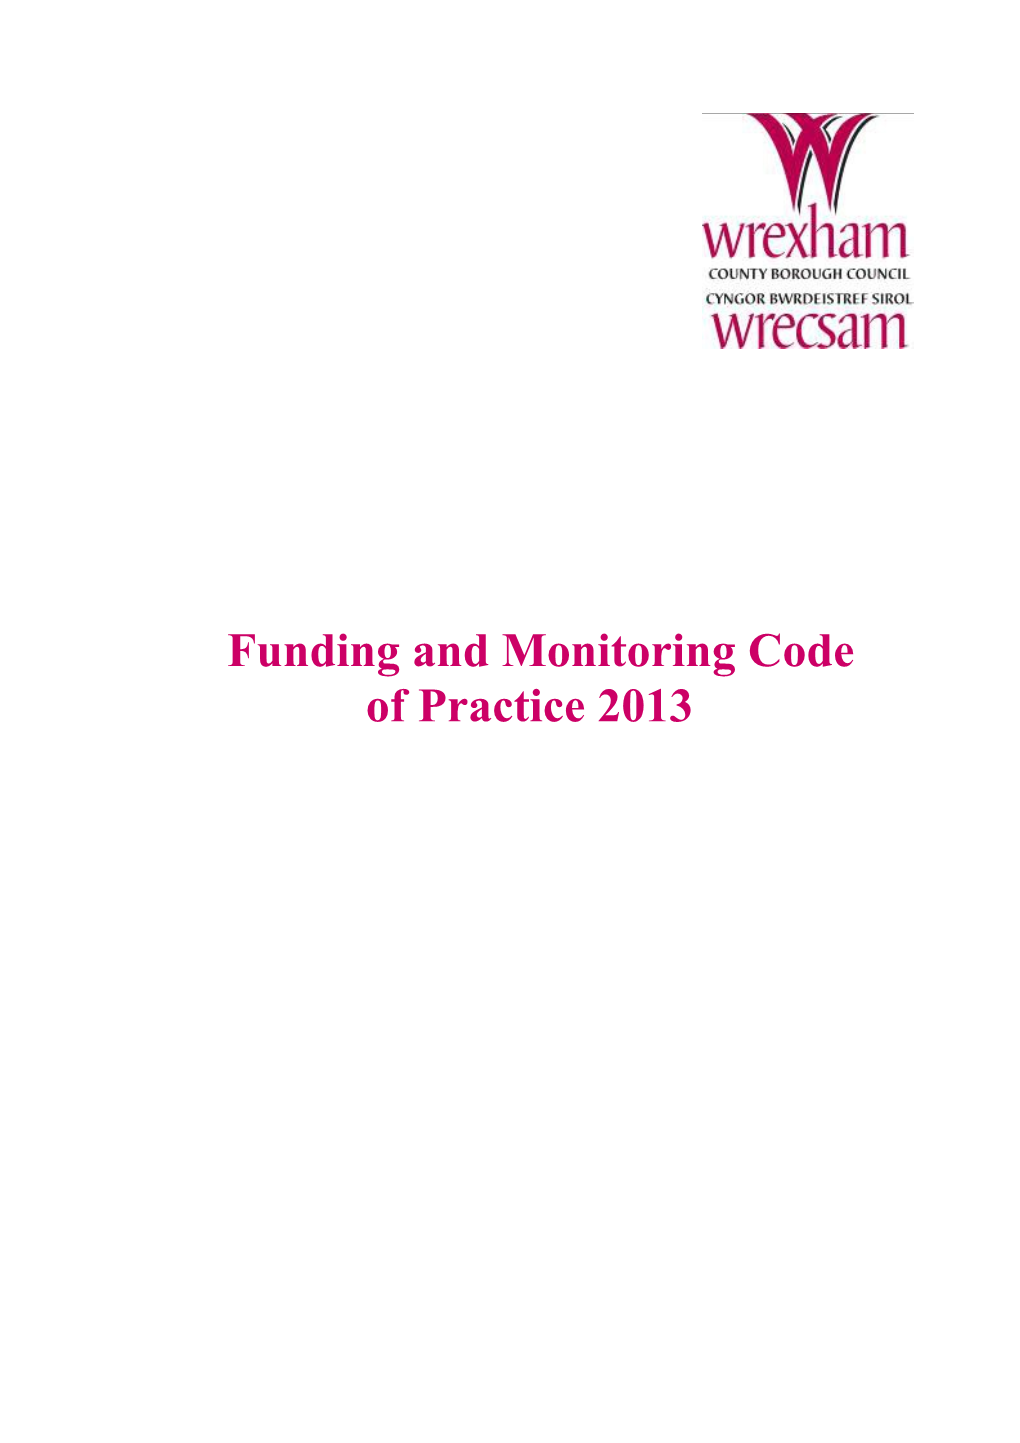 Funding and Monitoring Code of Practice